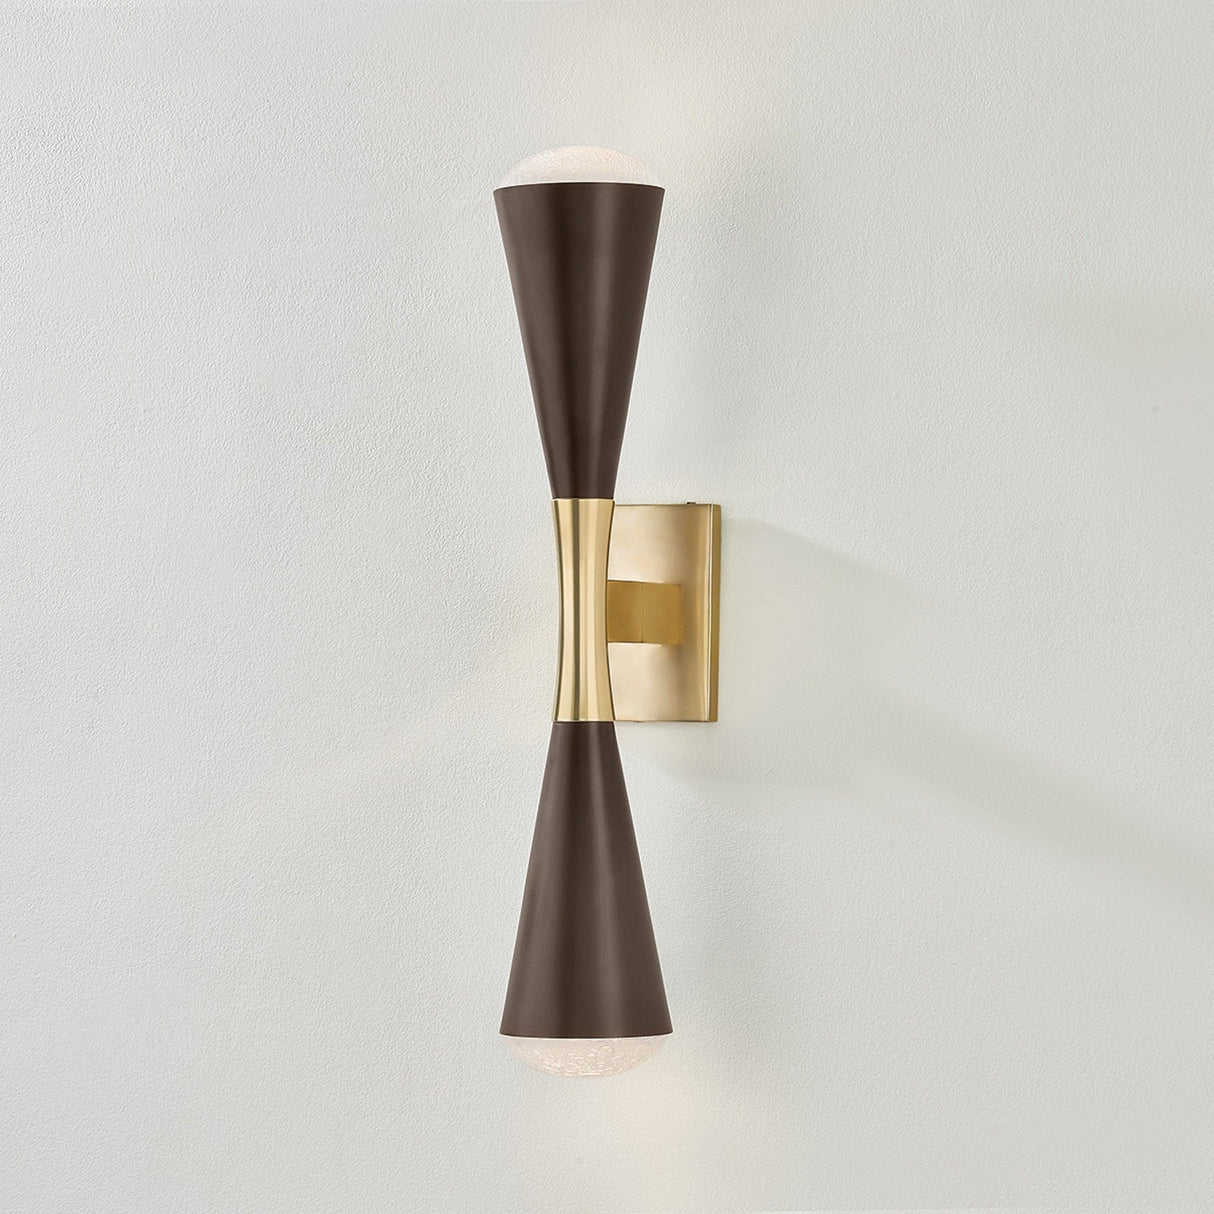 Barcelona Wall Sconce Wall Sconces